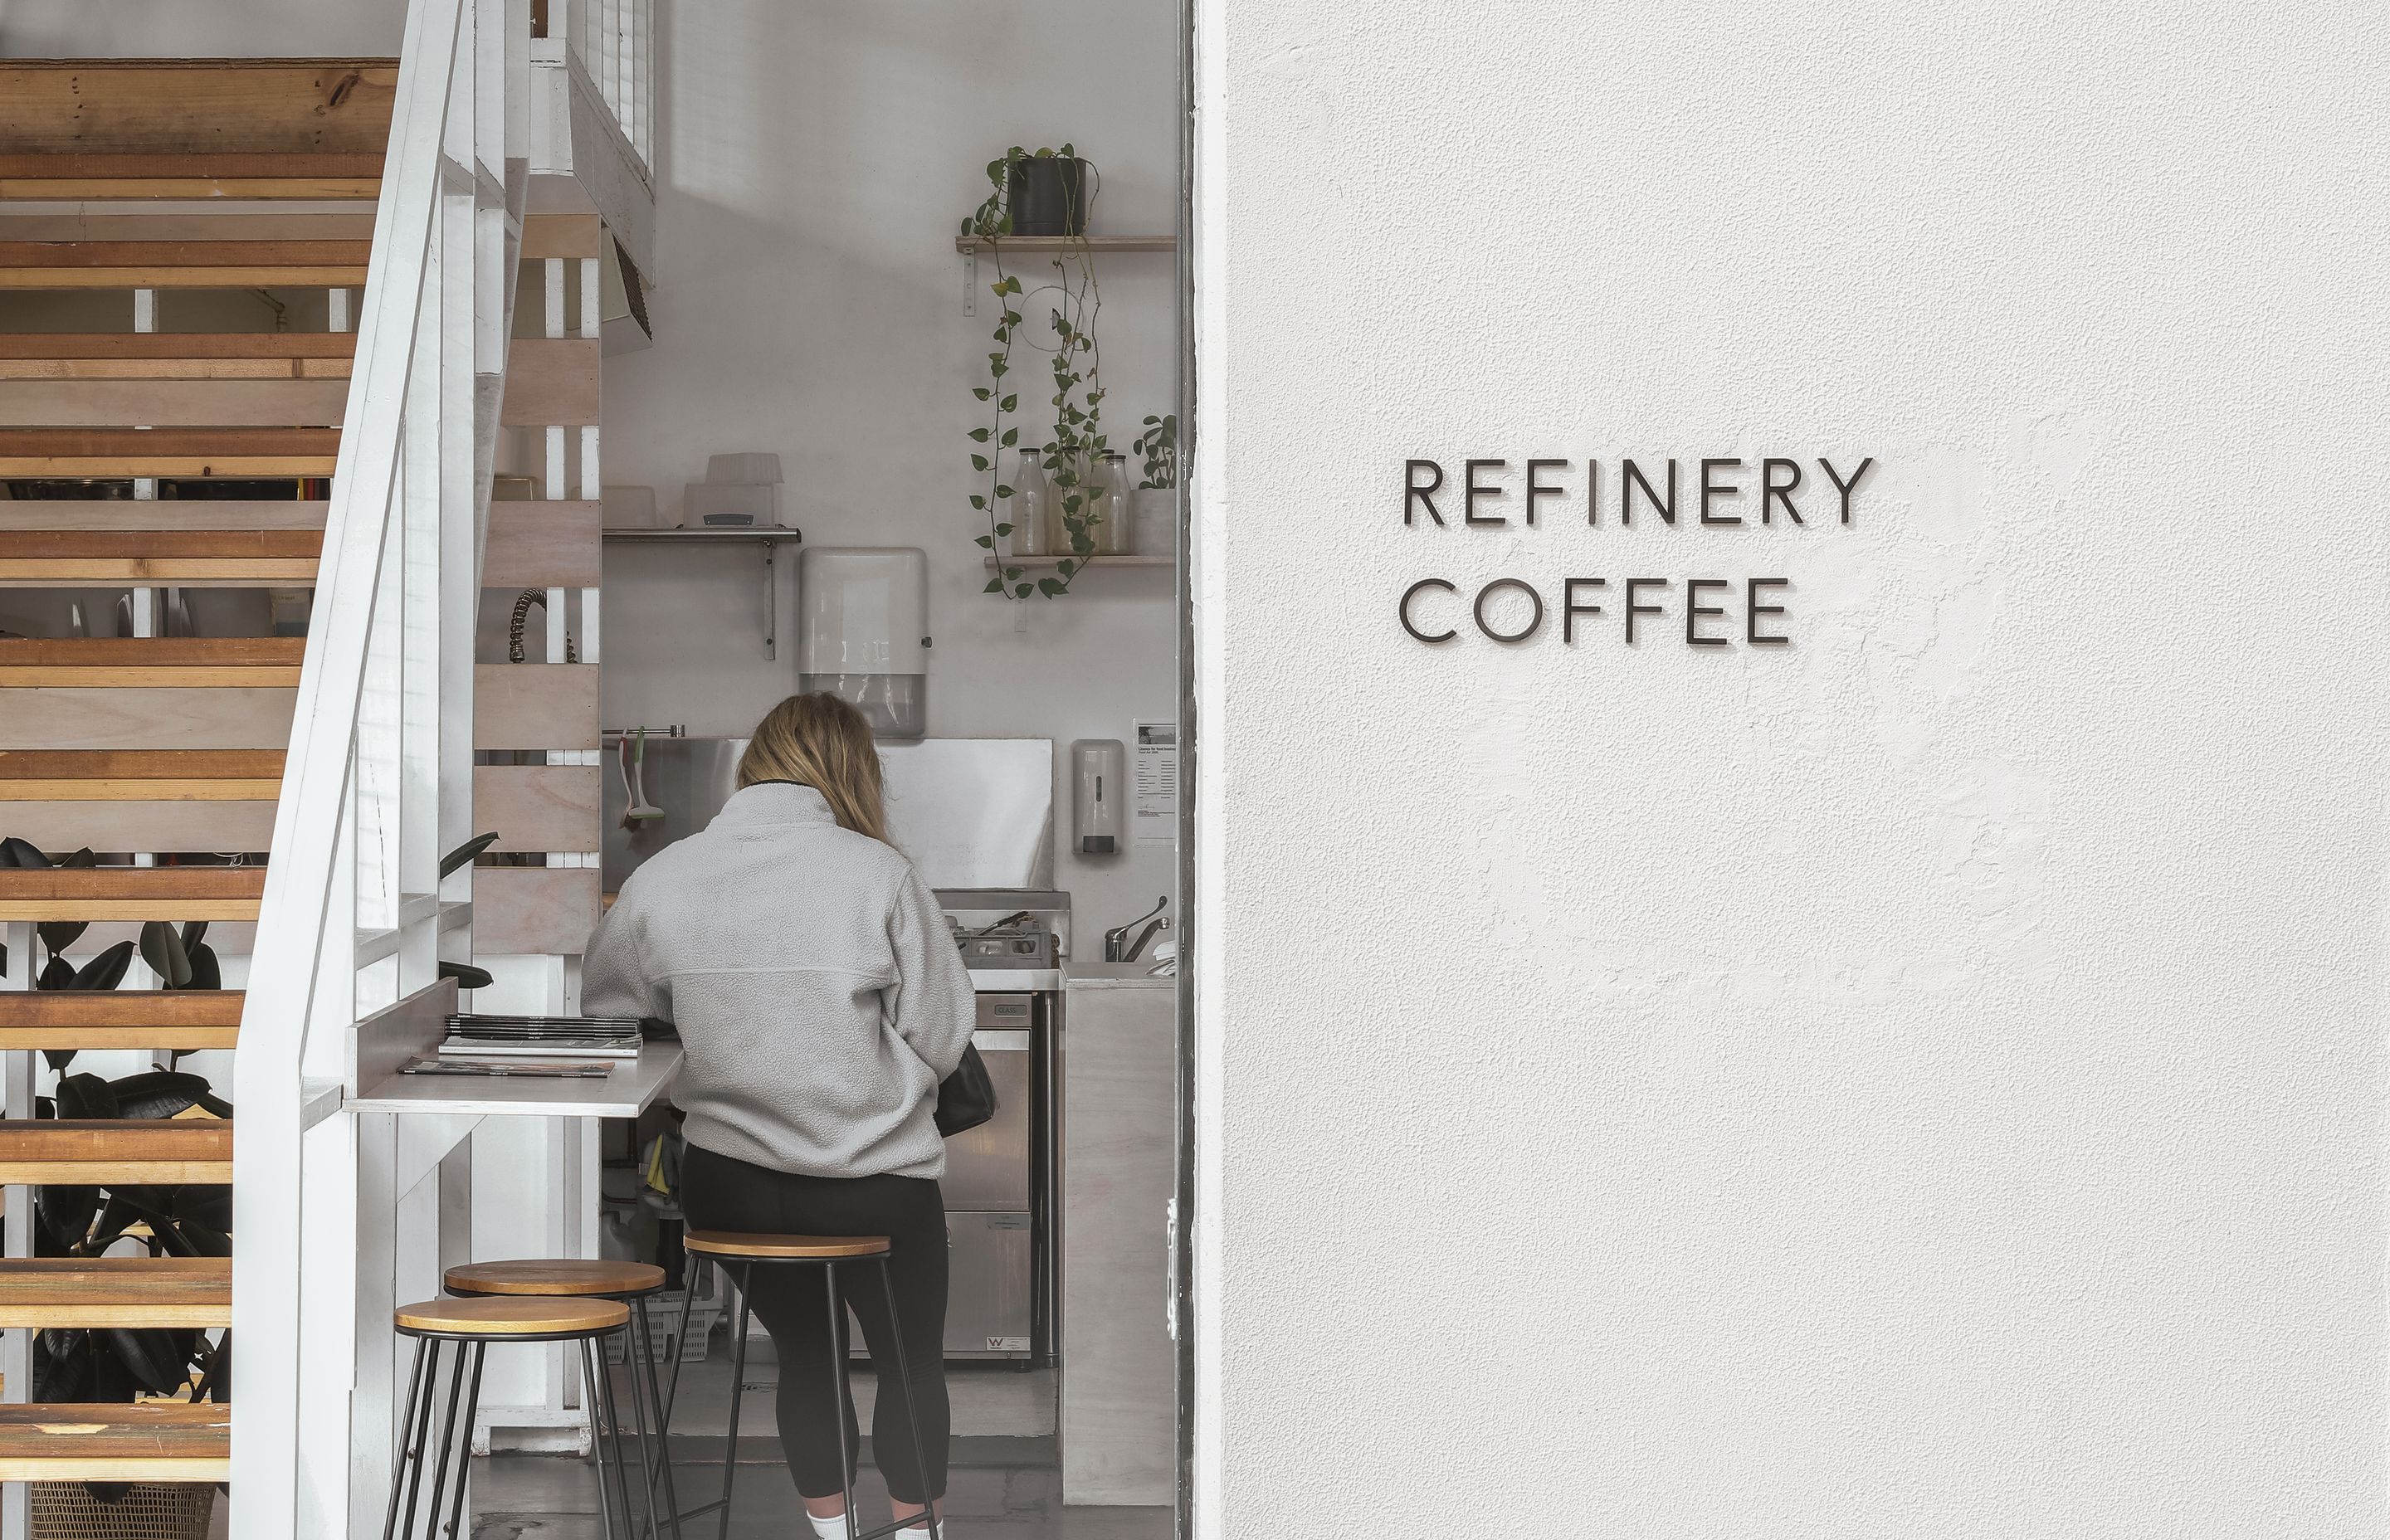 Signage can be used as a distinct and elegant way to signpost a business, as seen here at Refinery Coffee.